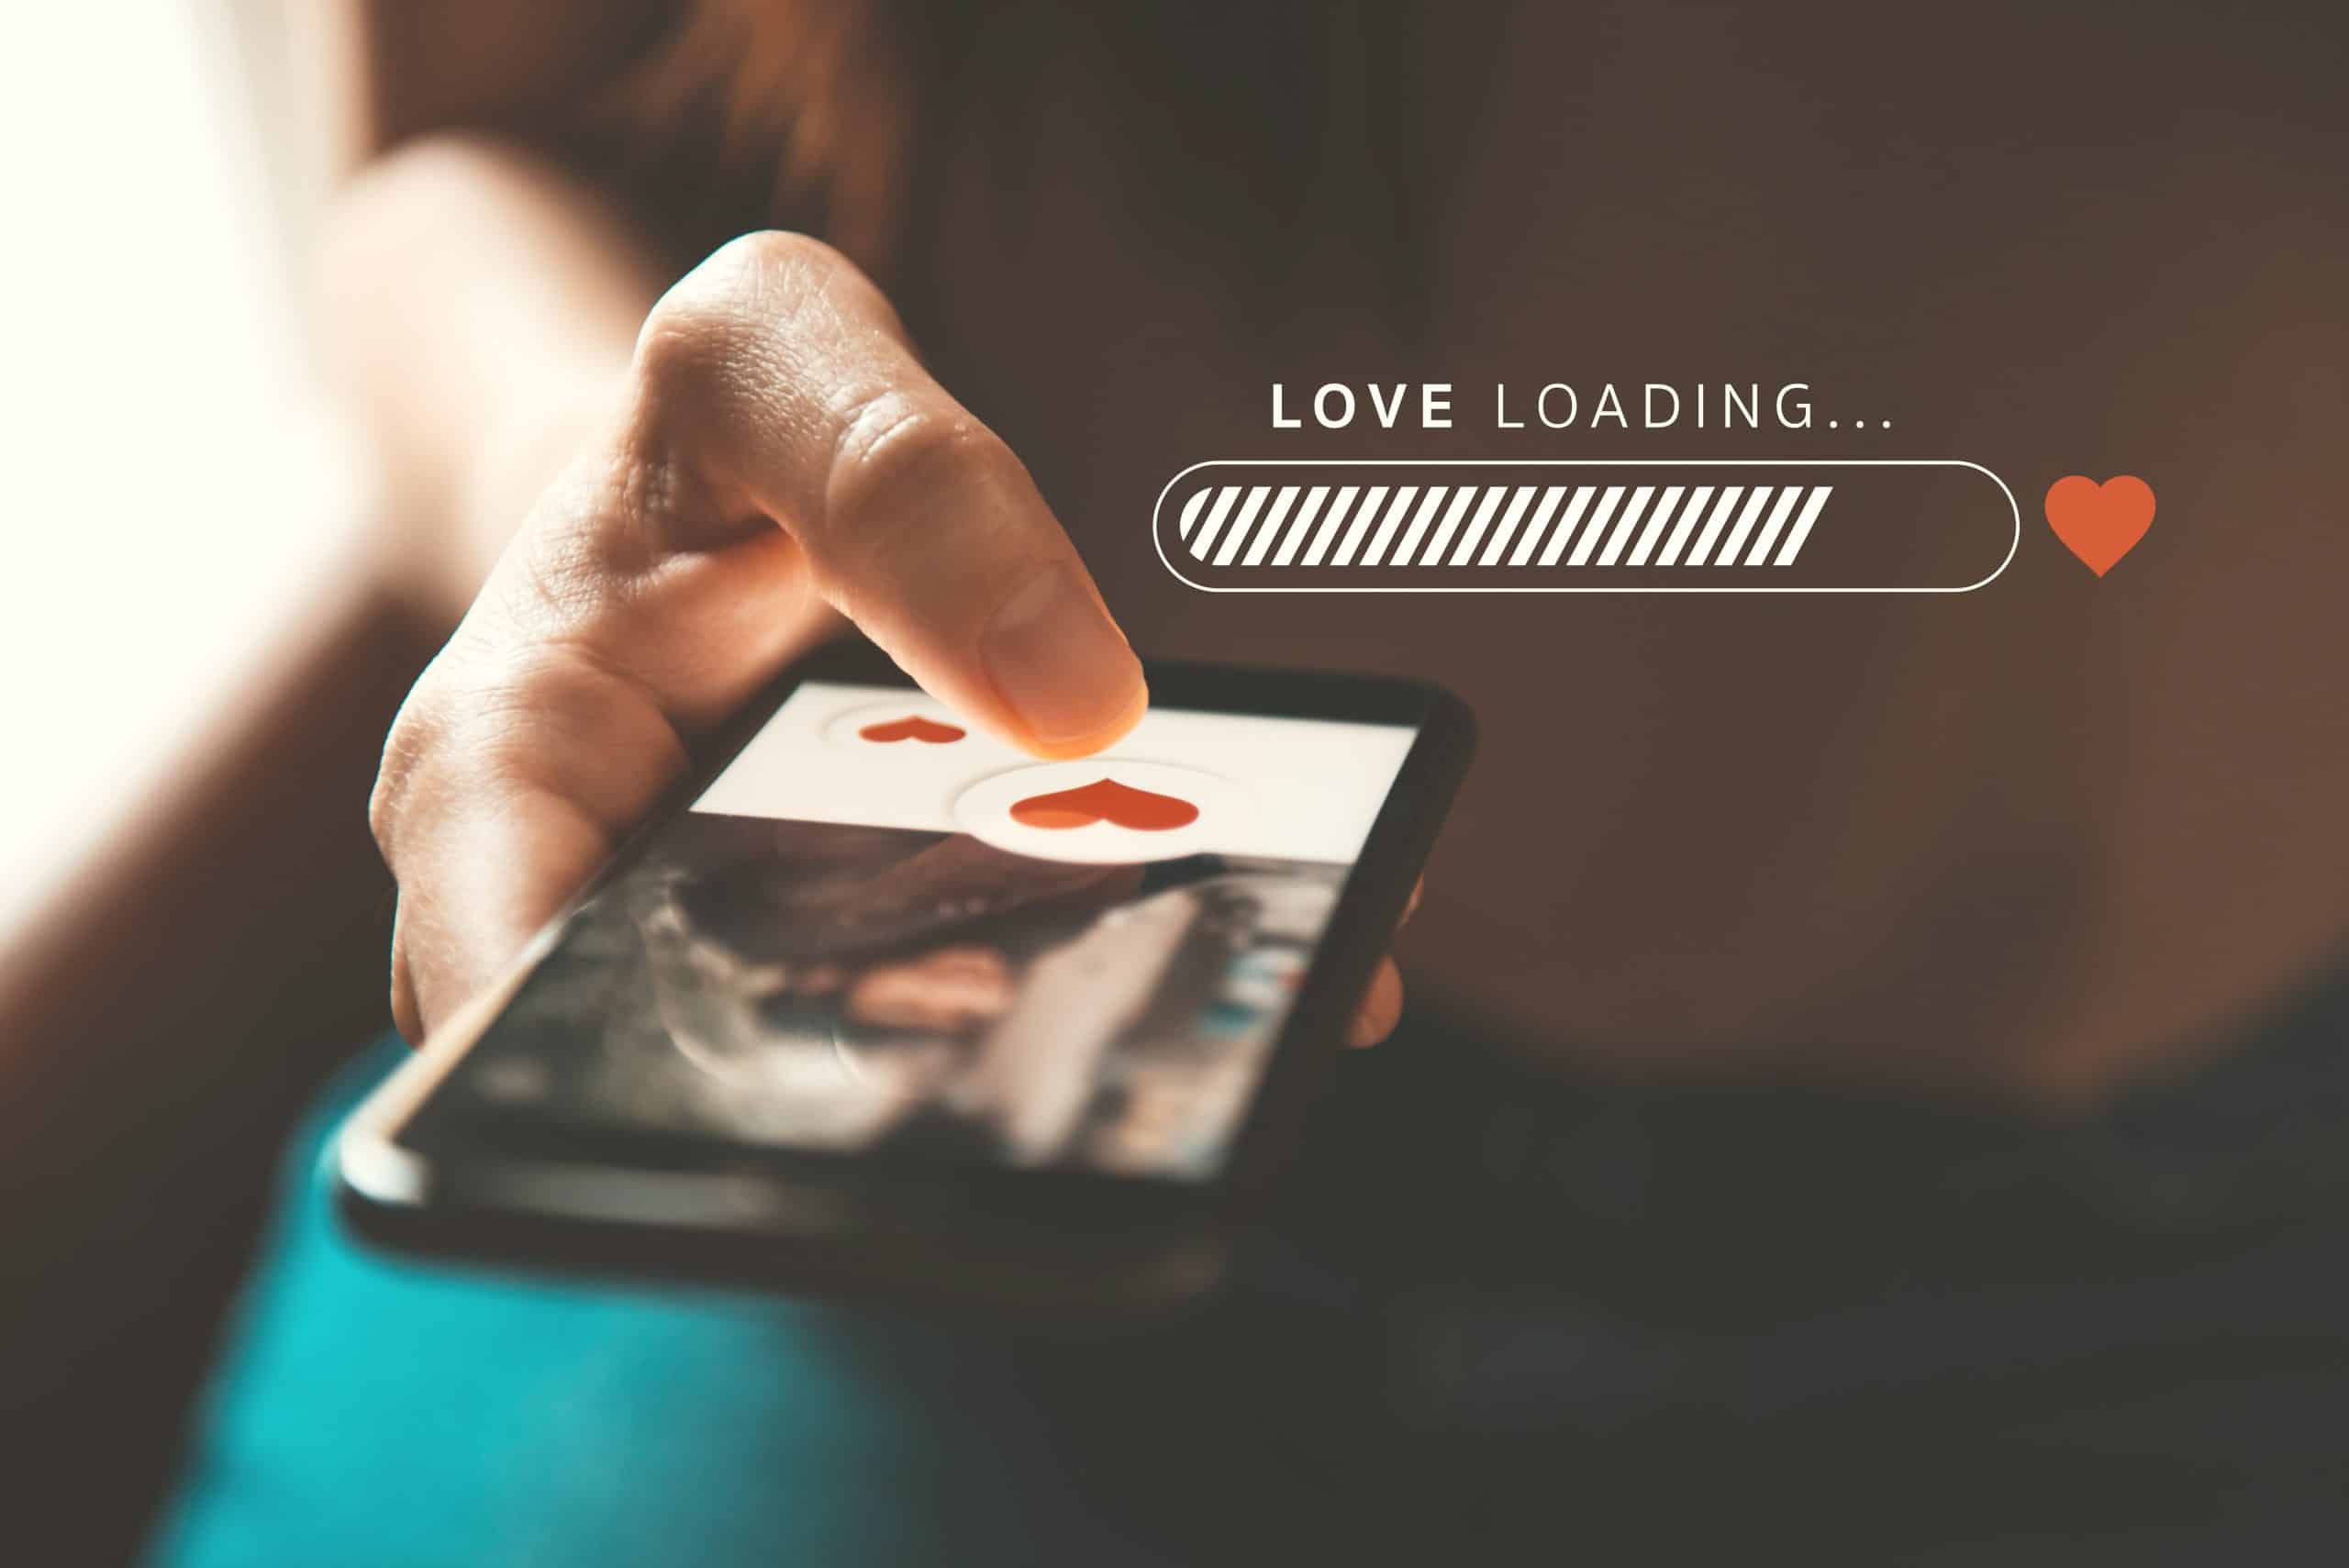 Love loading progress, Finger of woman pushing heart icon on screen in mobile smartphone application. Online dating app